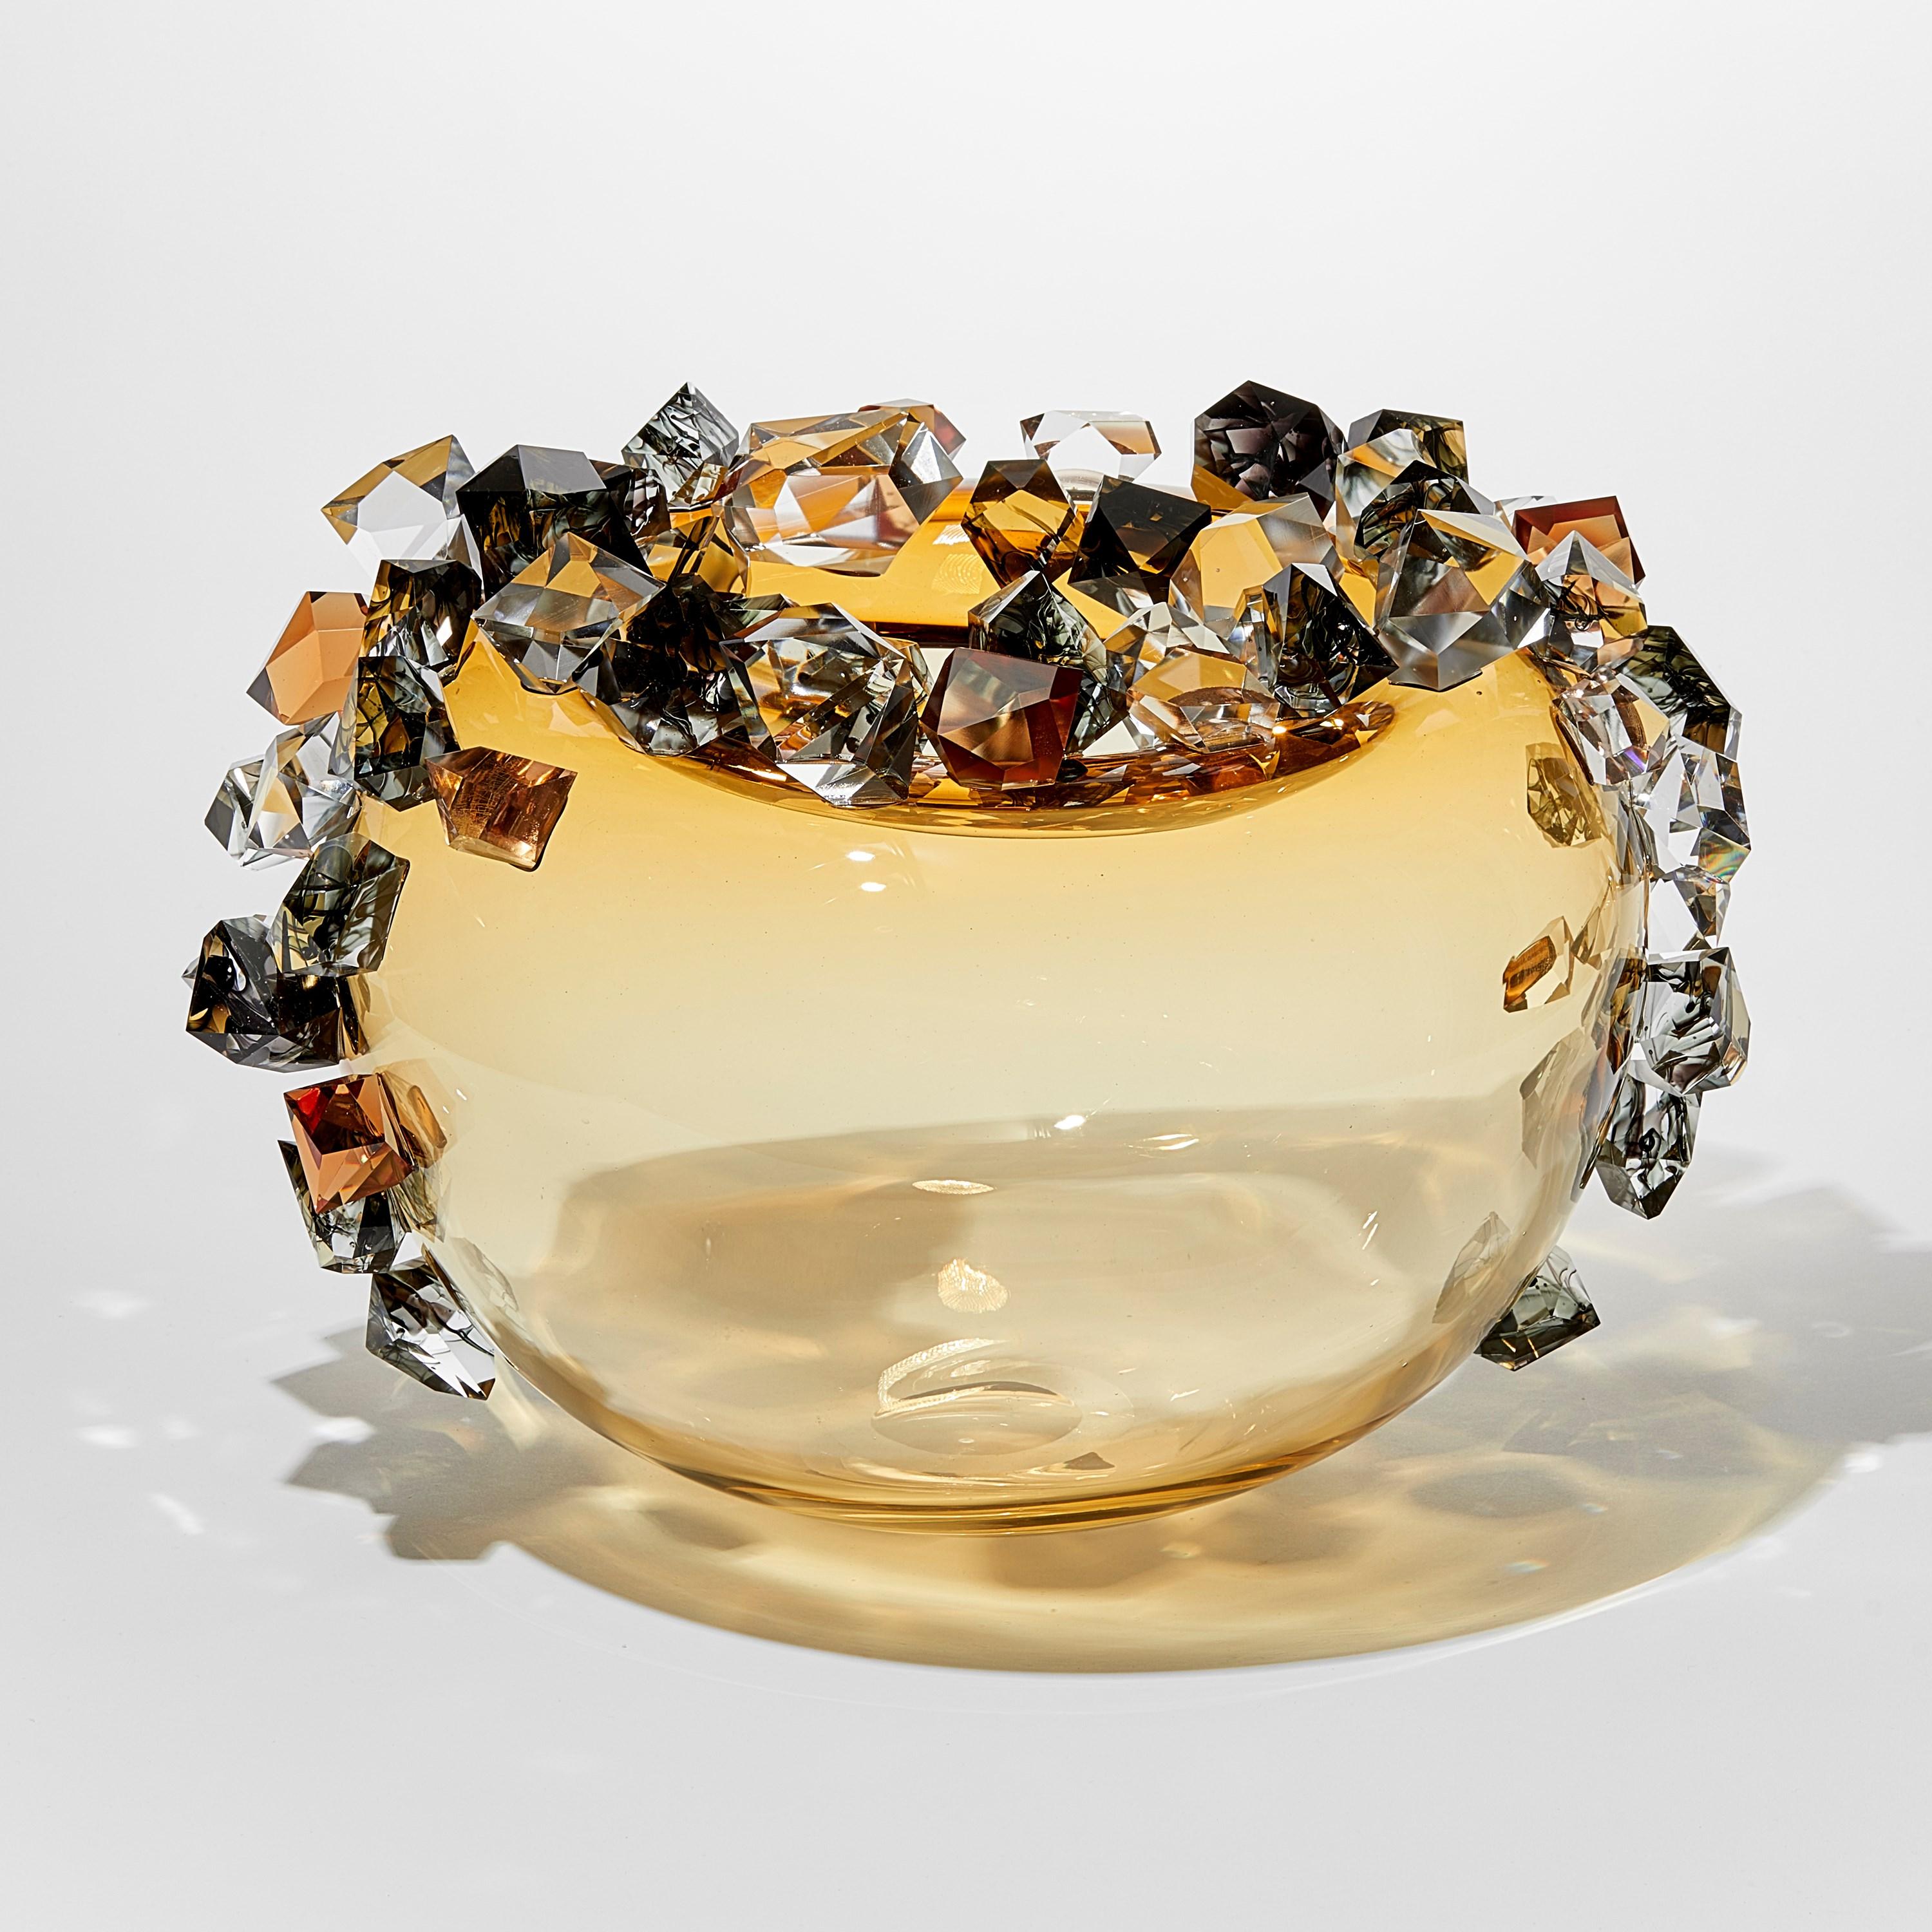 'Cristal Diffusion in Amber' is a unique glass sculptural vessel by the Danish artist, Hanne Enemark. The glass body has been hand-blown and painstakingly covered with cast and cut glass crystals, each made by hand by the artist.

With infinite